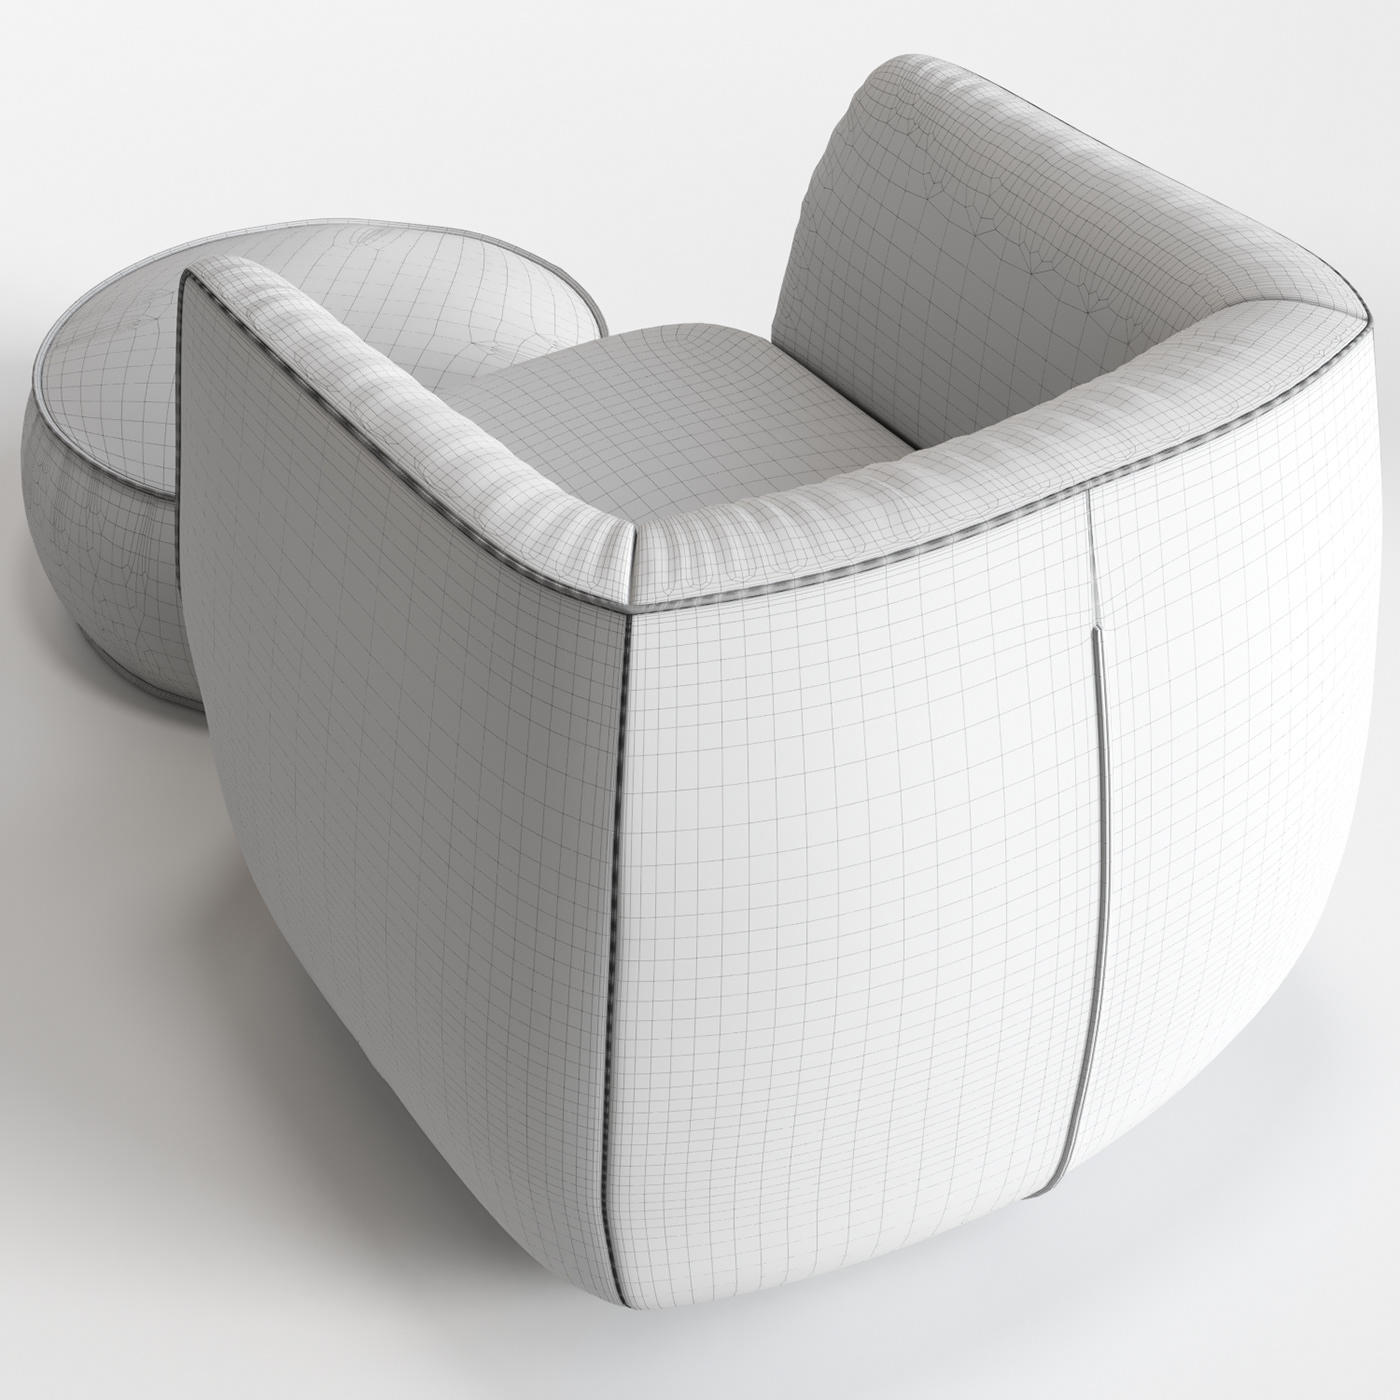 visualization 3d modeling 3ds max corona armchair 3D Render padded stool skdesign